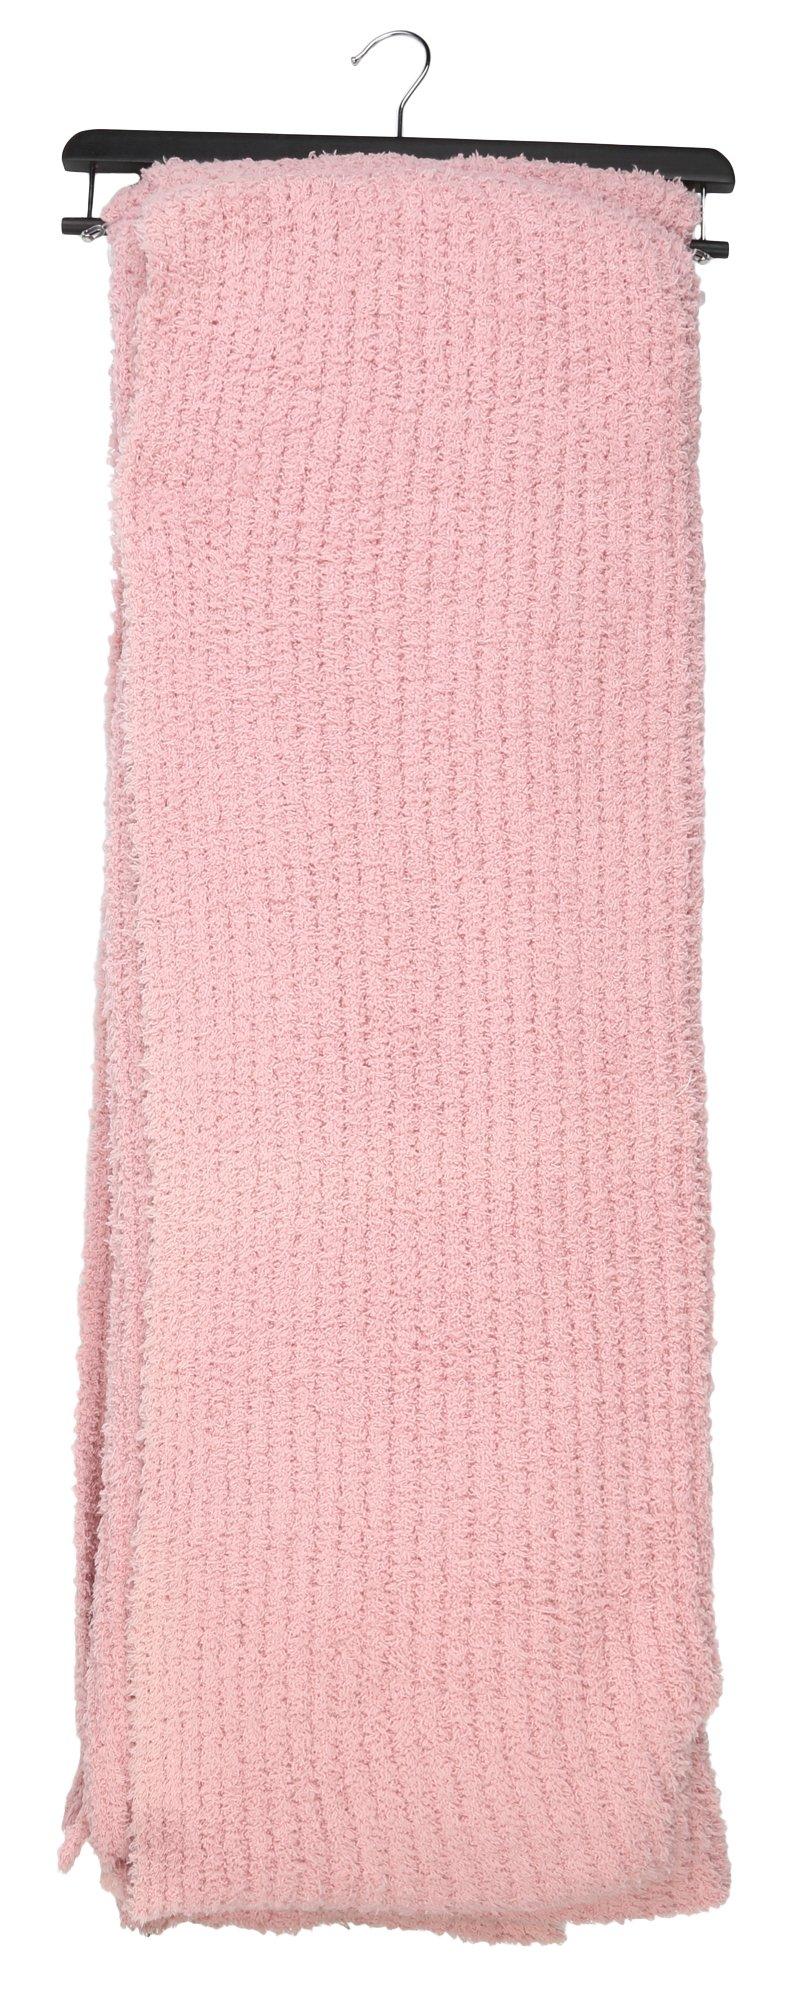 60x70 Solid Cozy Knit  Throw - Pink